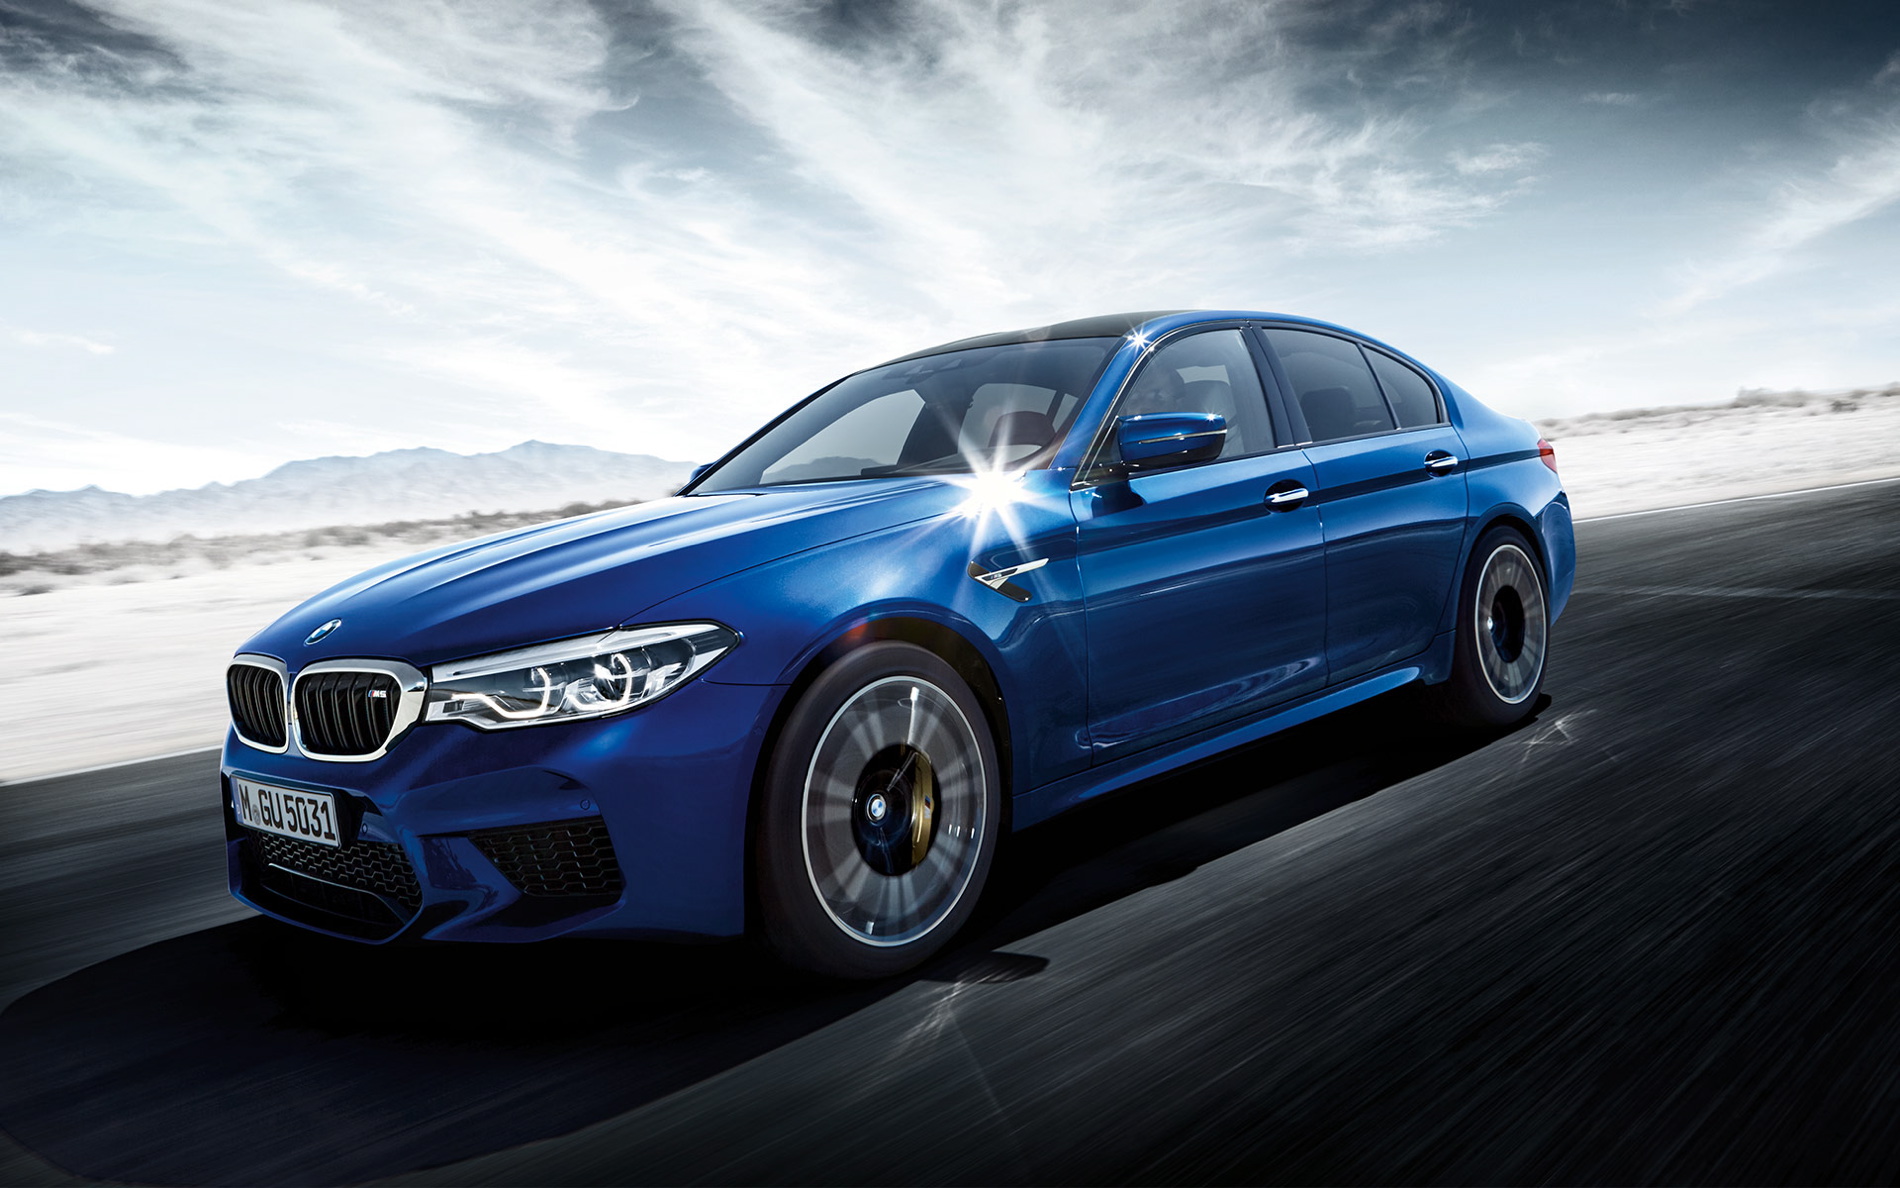 Wallpaper Of The New Bmw F90 M5